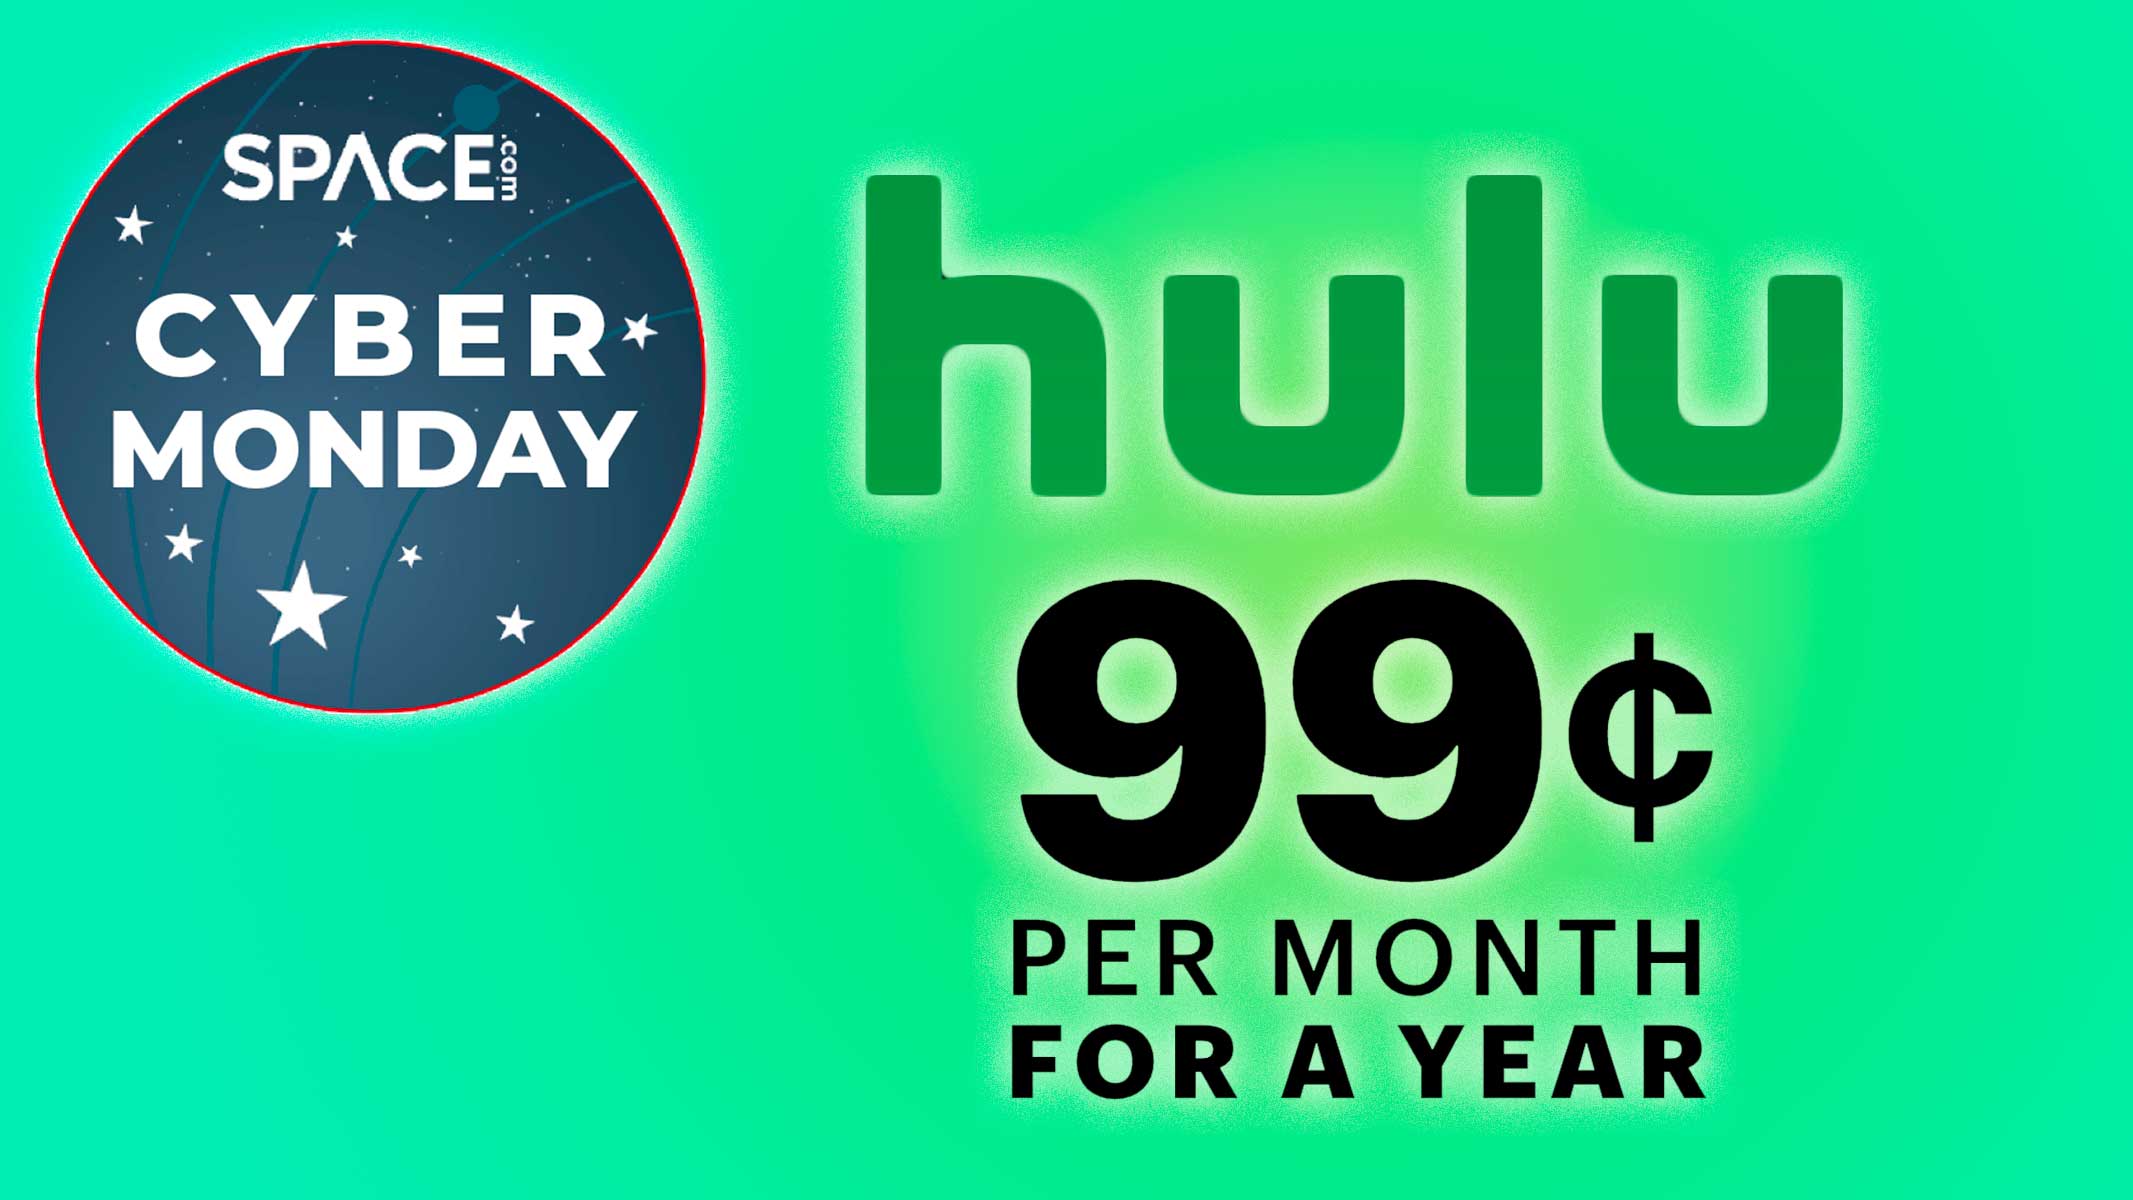 Hulu Streaming Deal Discounts Subscription Price to $2: Get 75% Off